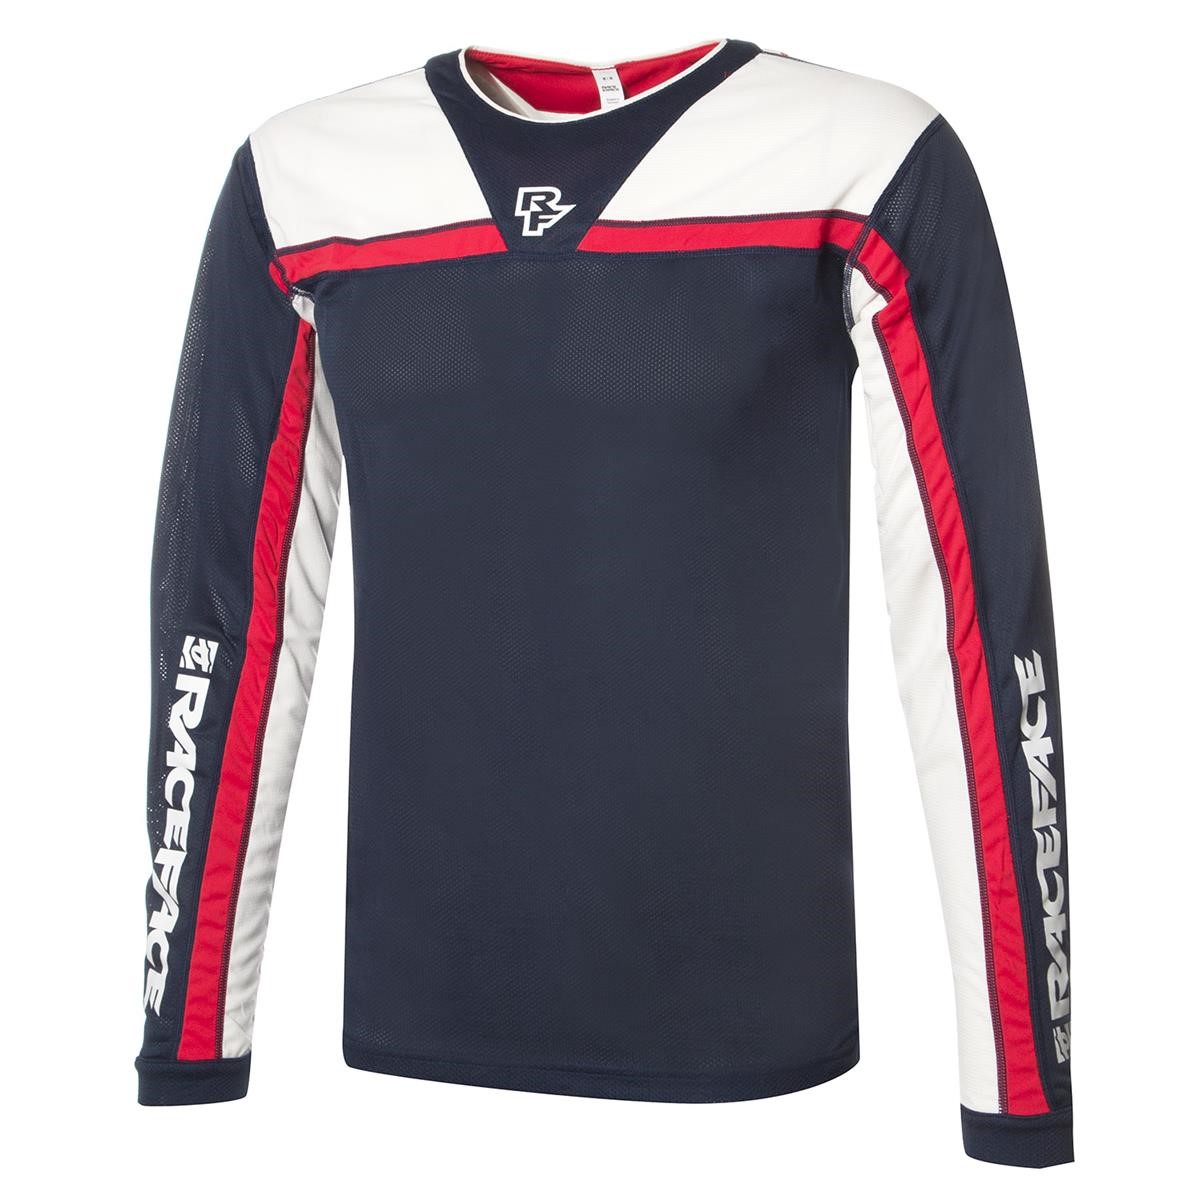 Race Face Maglia MTB Manica Lunga Stage Navy/Flame